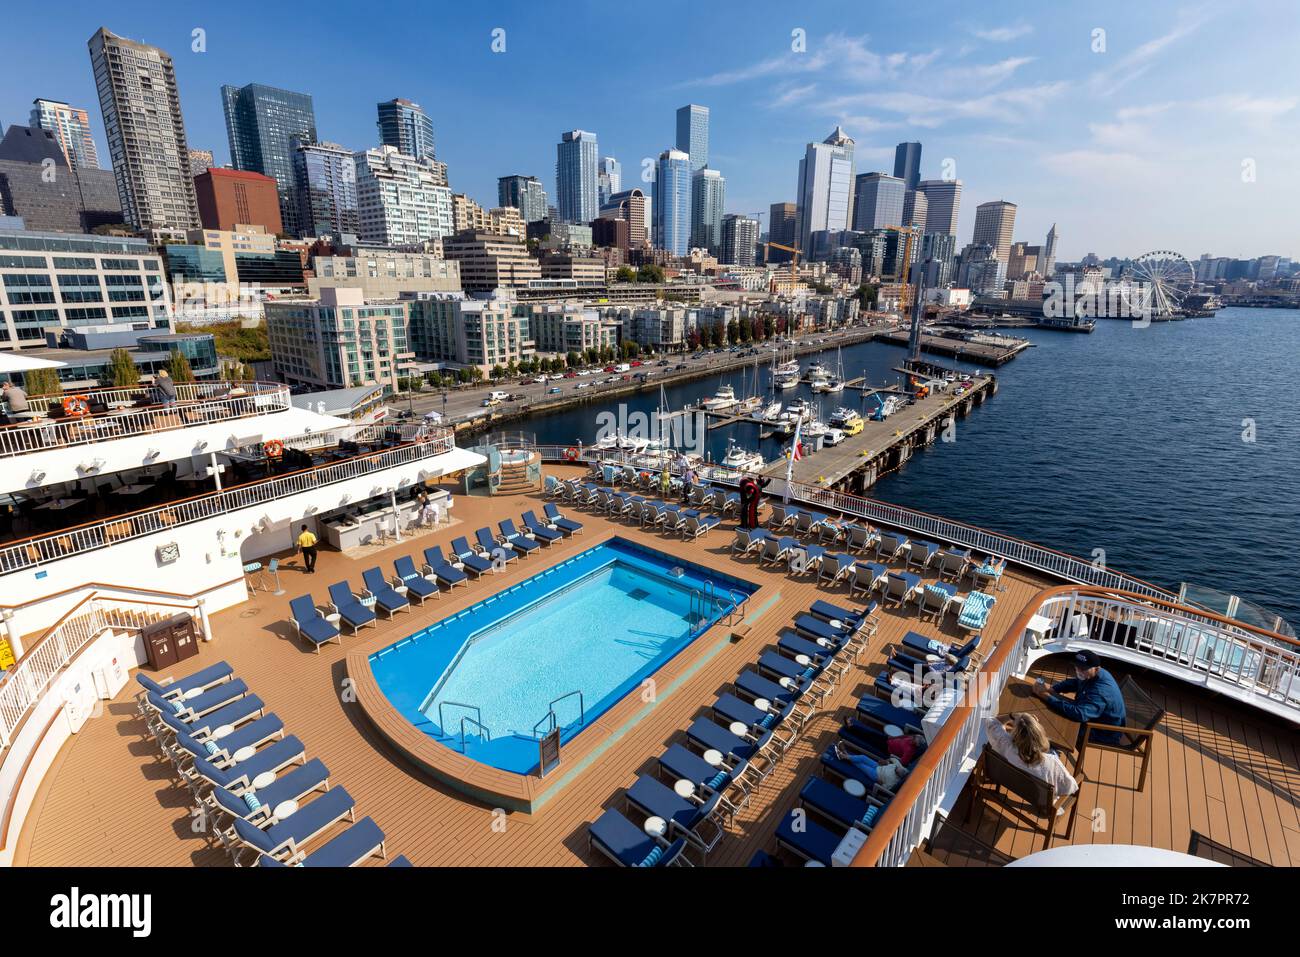 Downtown Seattle Skyline viewed from cruise ship at Pier 66 in Seattle, Washington, USA Stock Photo